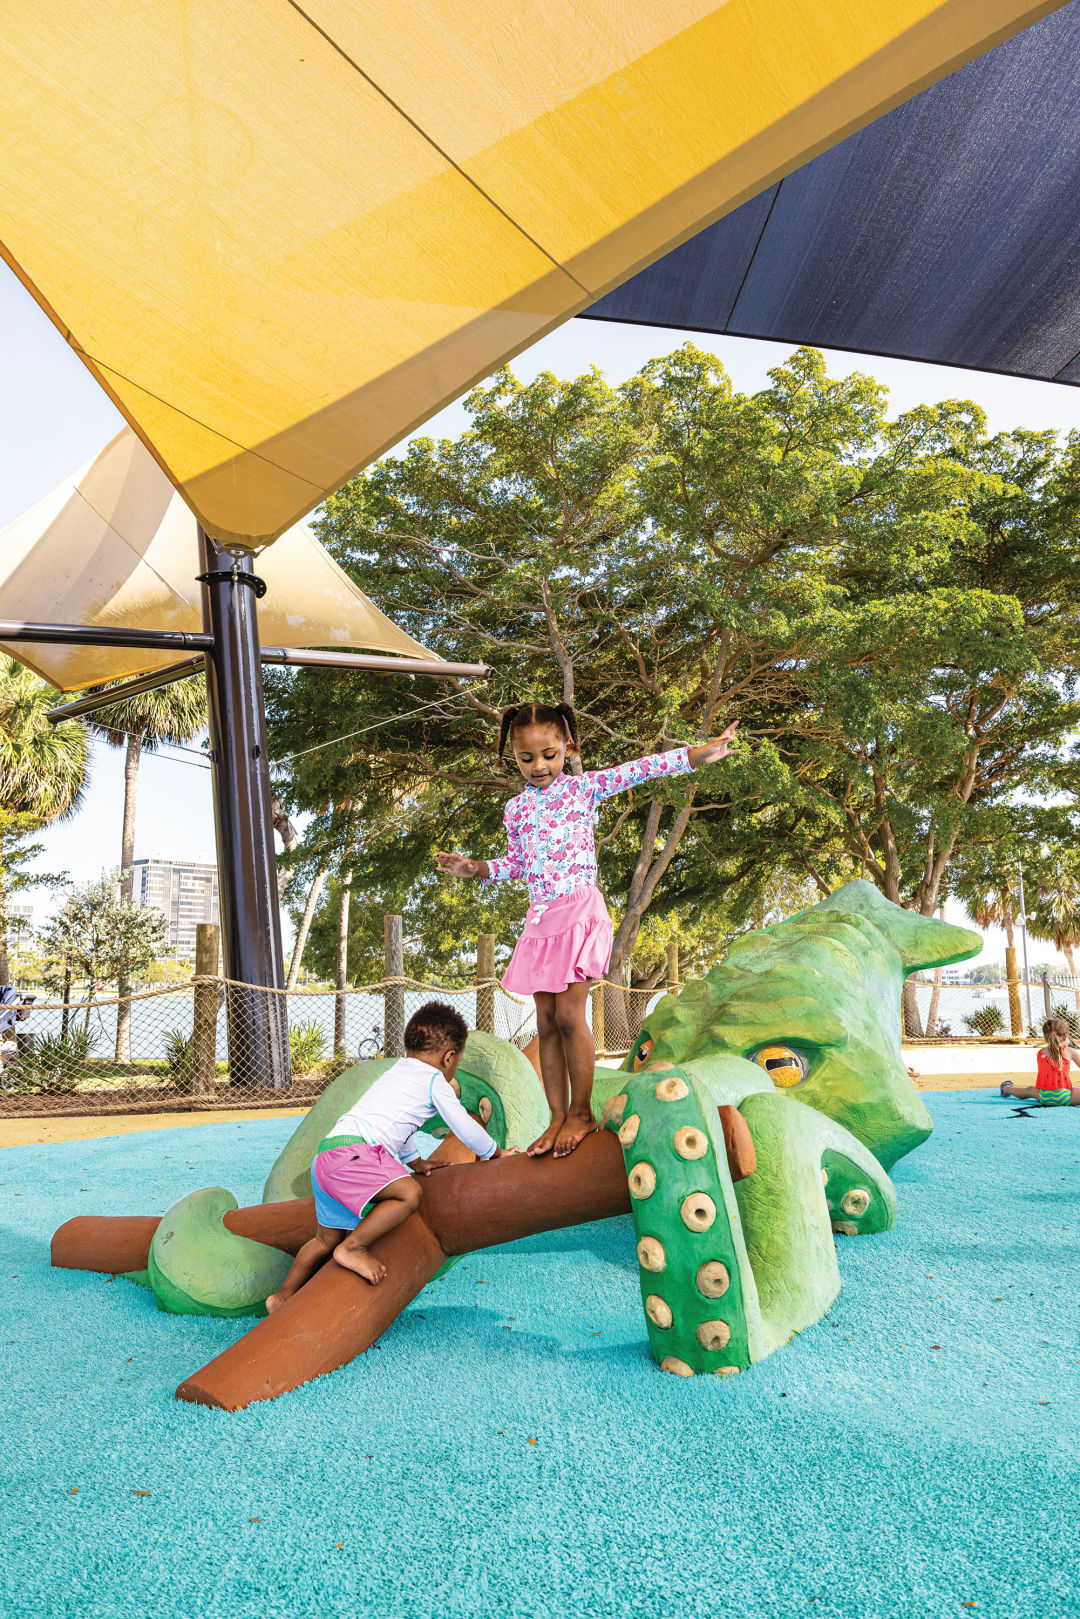 The kids’ section of Bayfront Park reopened earlier this year with a shipwreck-themed playground, lots of new structures to climb and scamper on, and tons of whimsical details.